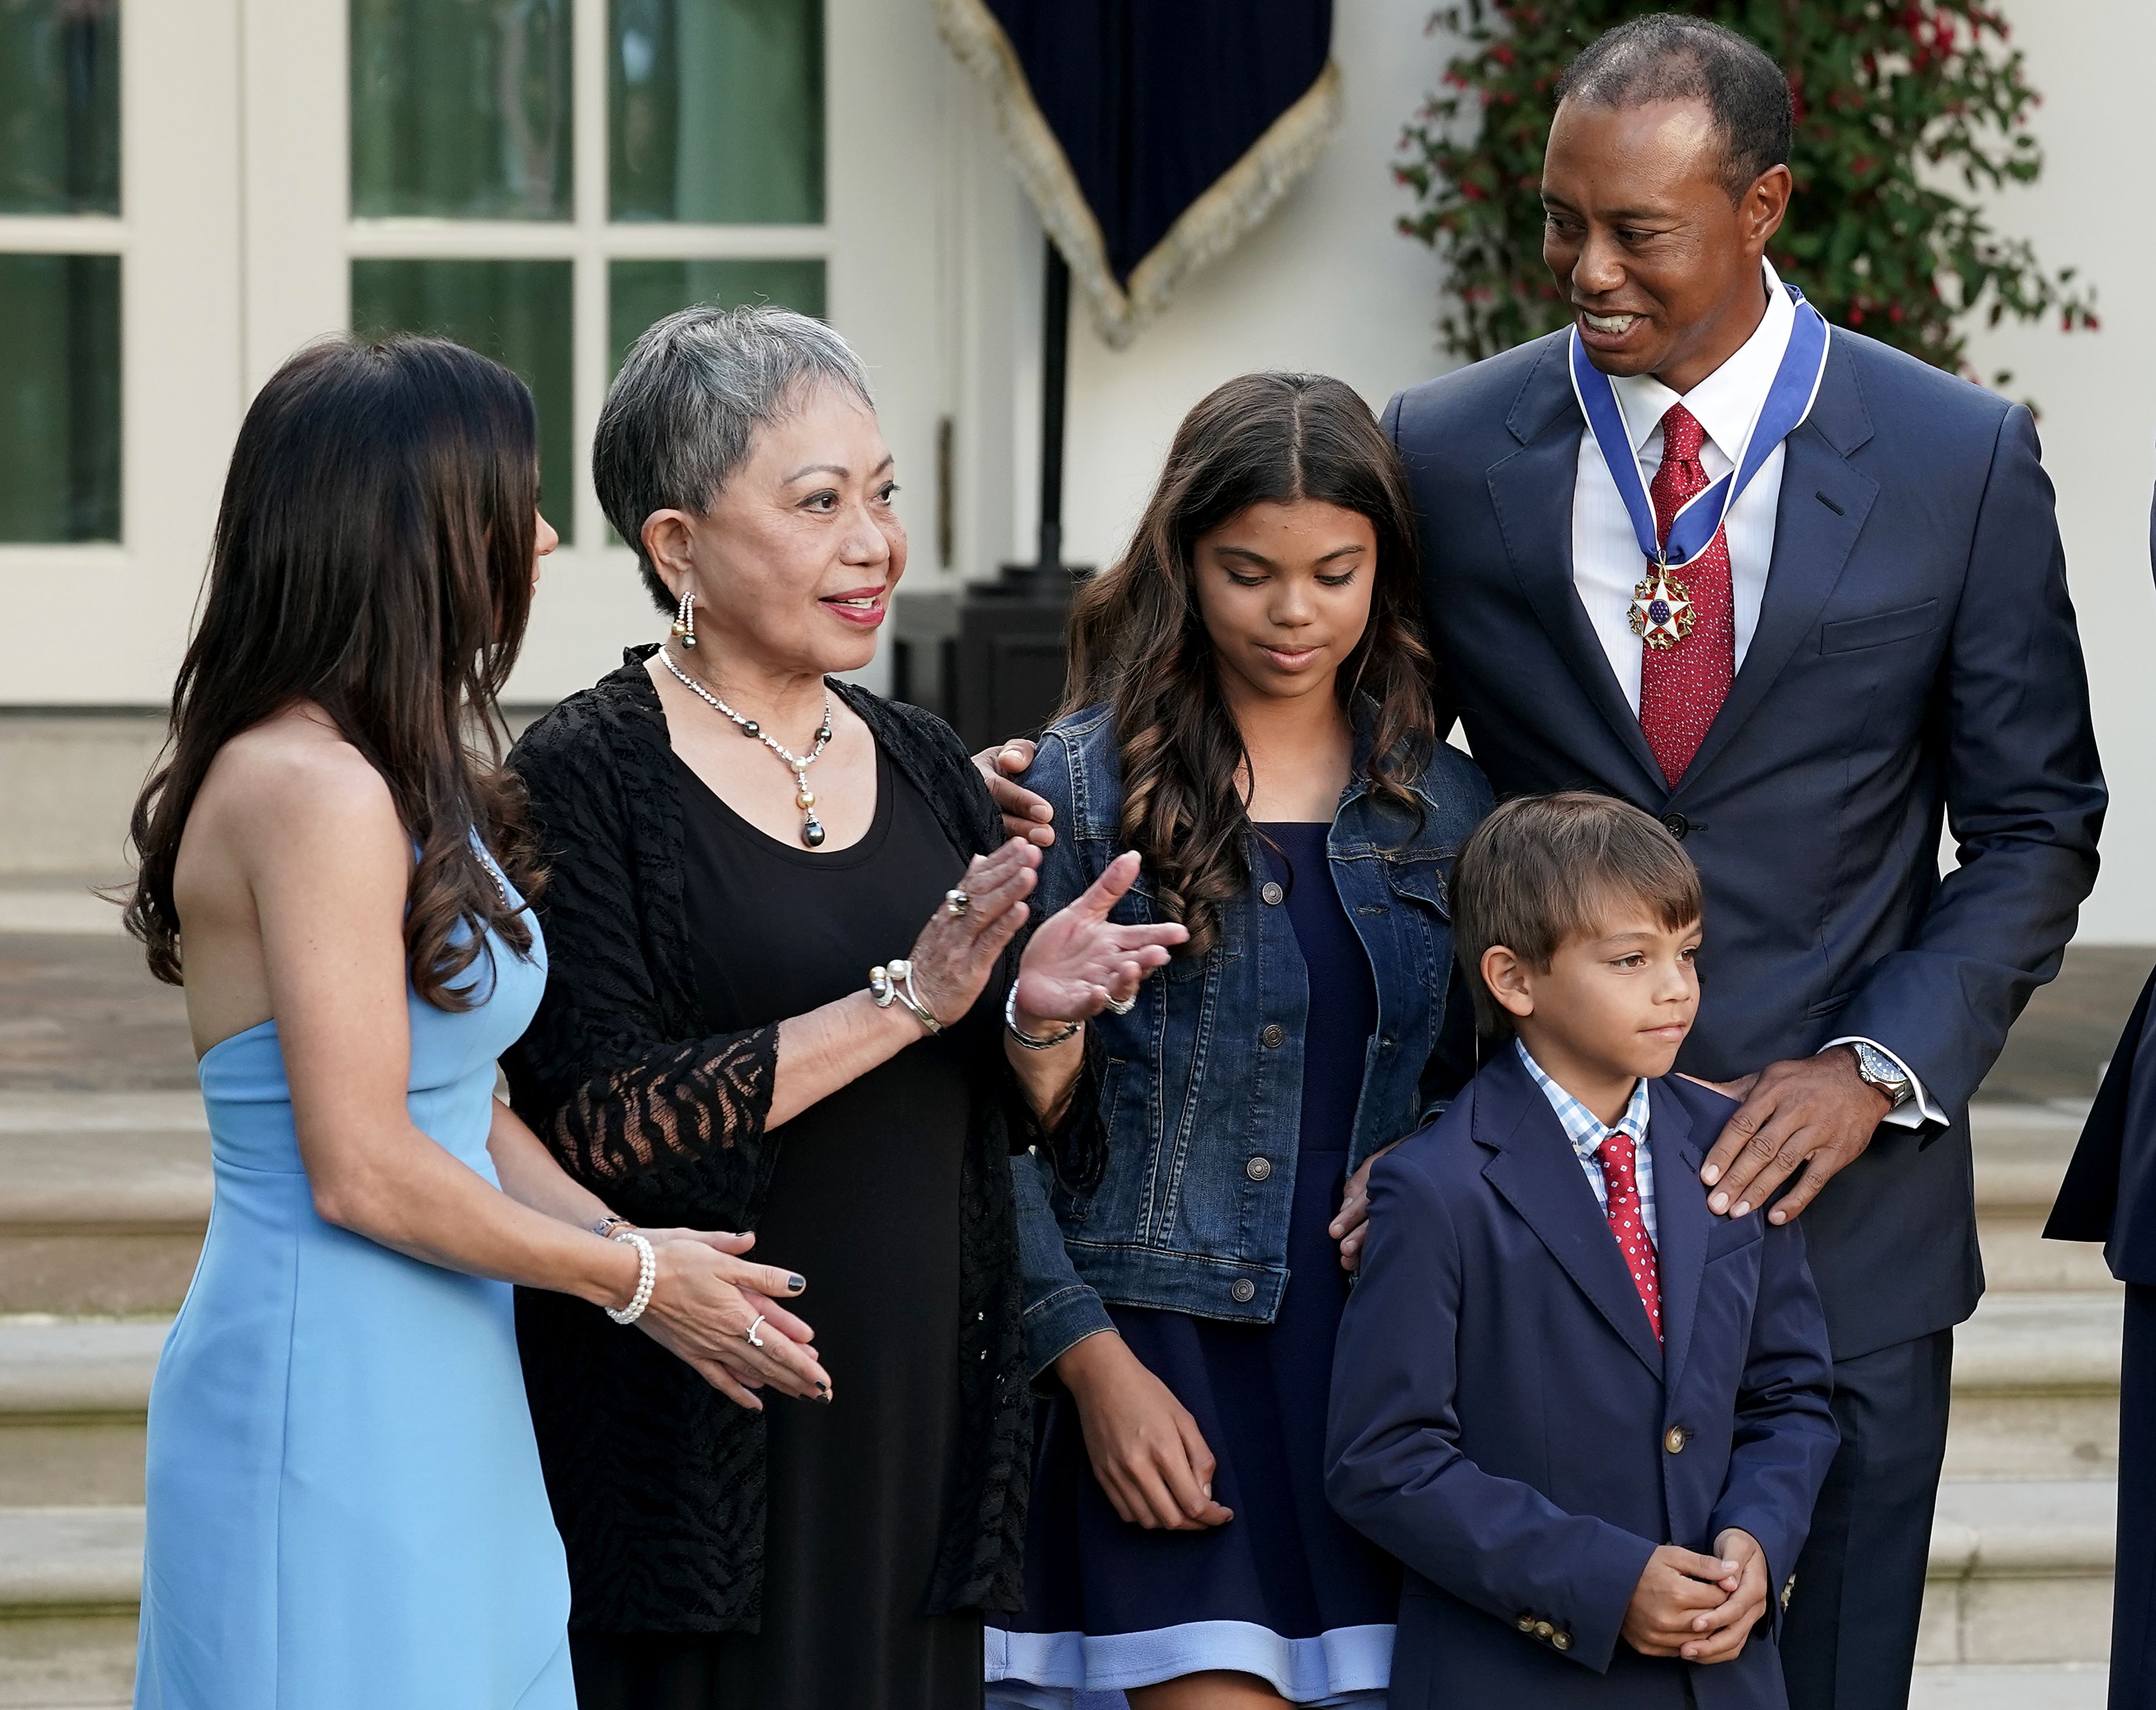 Tiger, Kultida, Sam Alexis, and Charlie Axel Woods alongside Erica Herman during Tiger's Medal of Freedom ceremony in the Rose Garden at the White House May 6, 2019, in Washington, DC. | Source: Getty Images